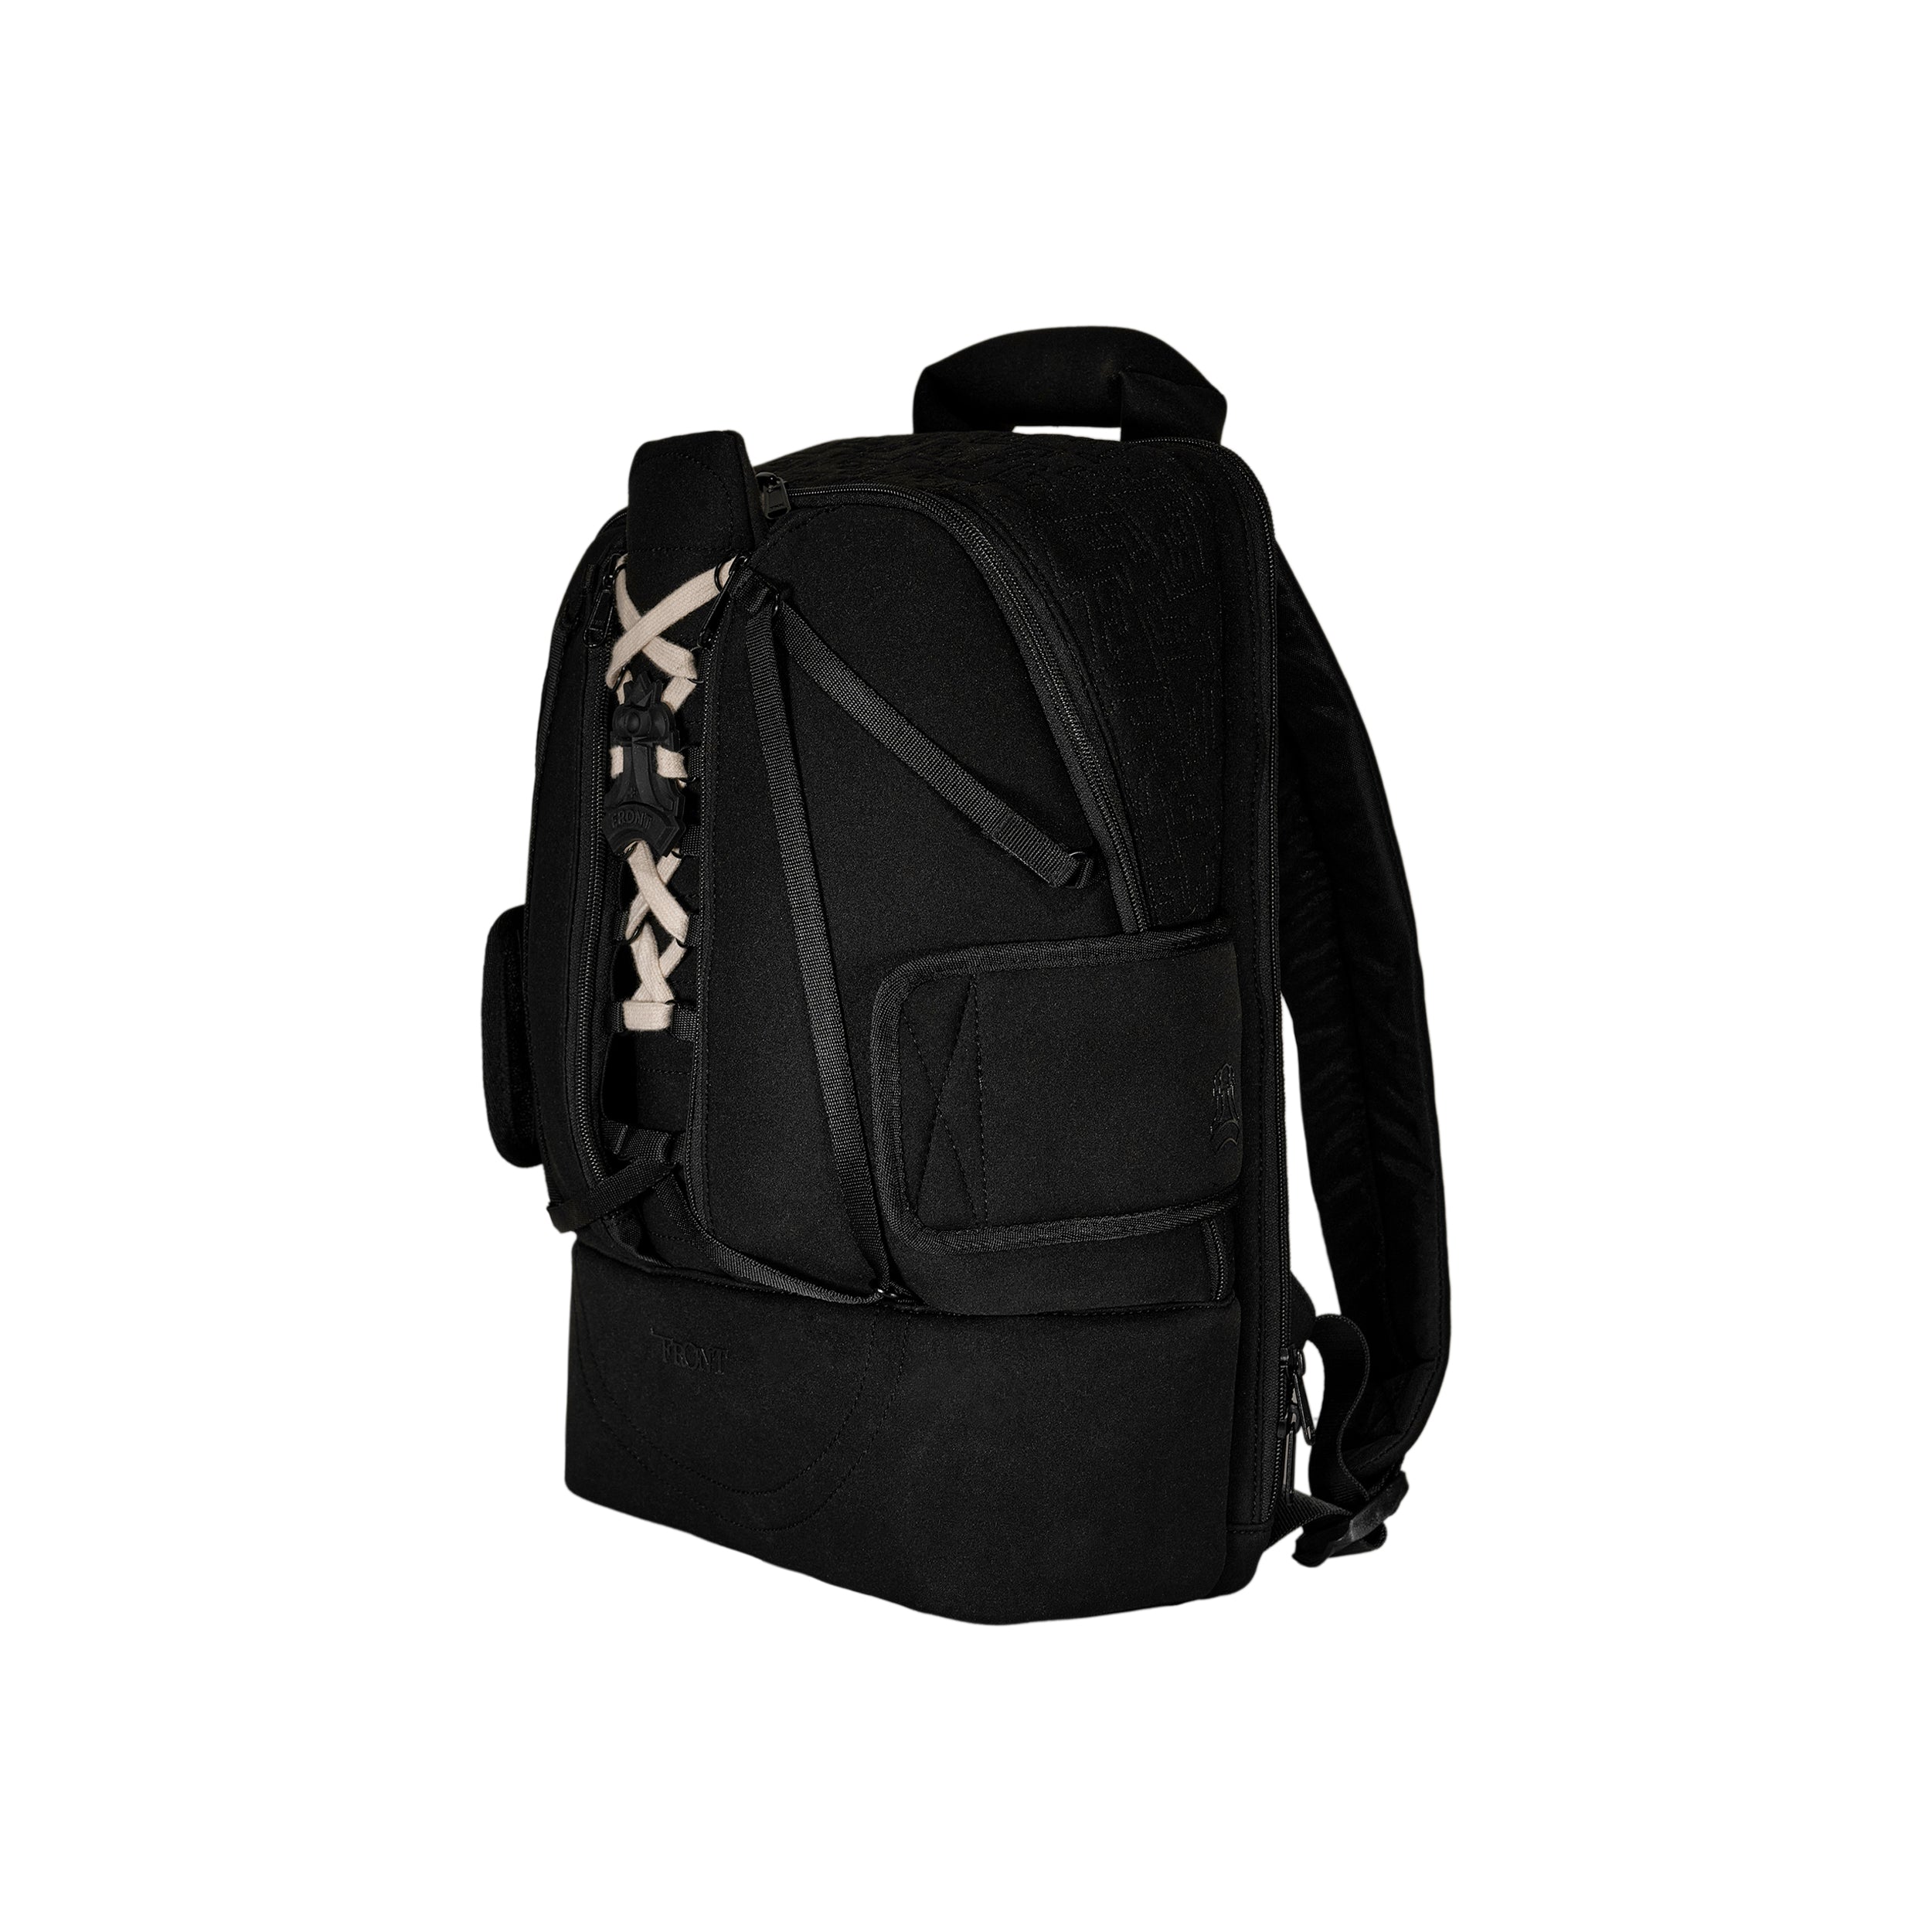 FRONT Queening The Pawn Backpack SB22 - BLACK - M